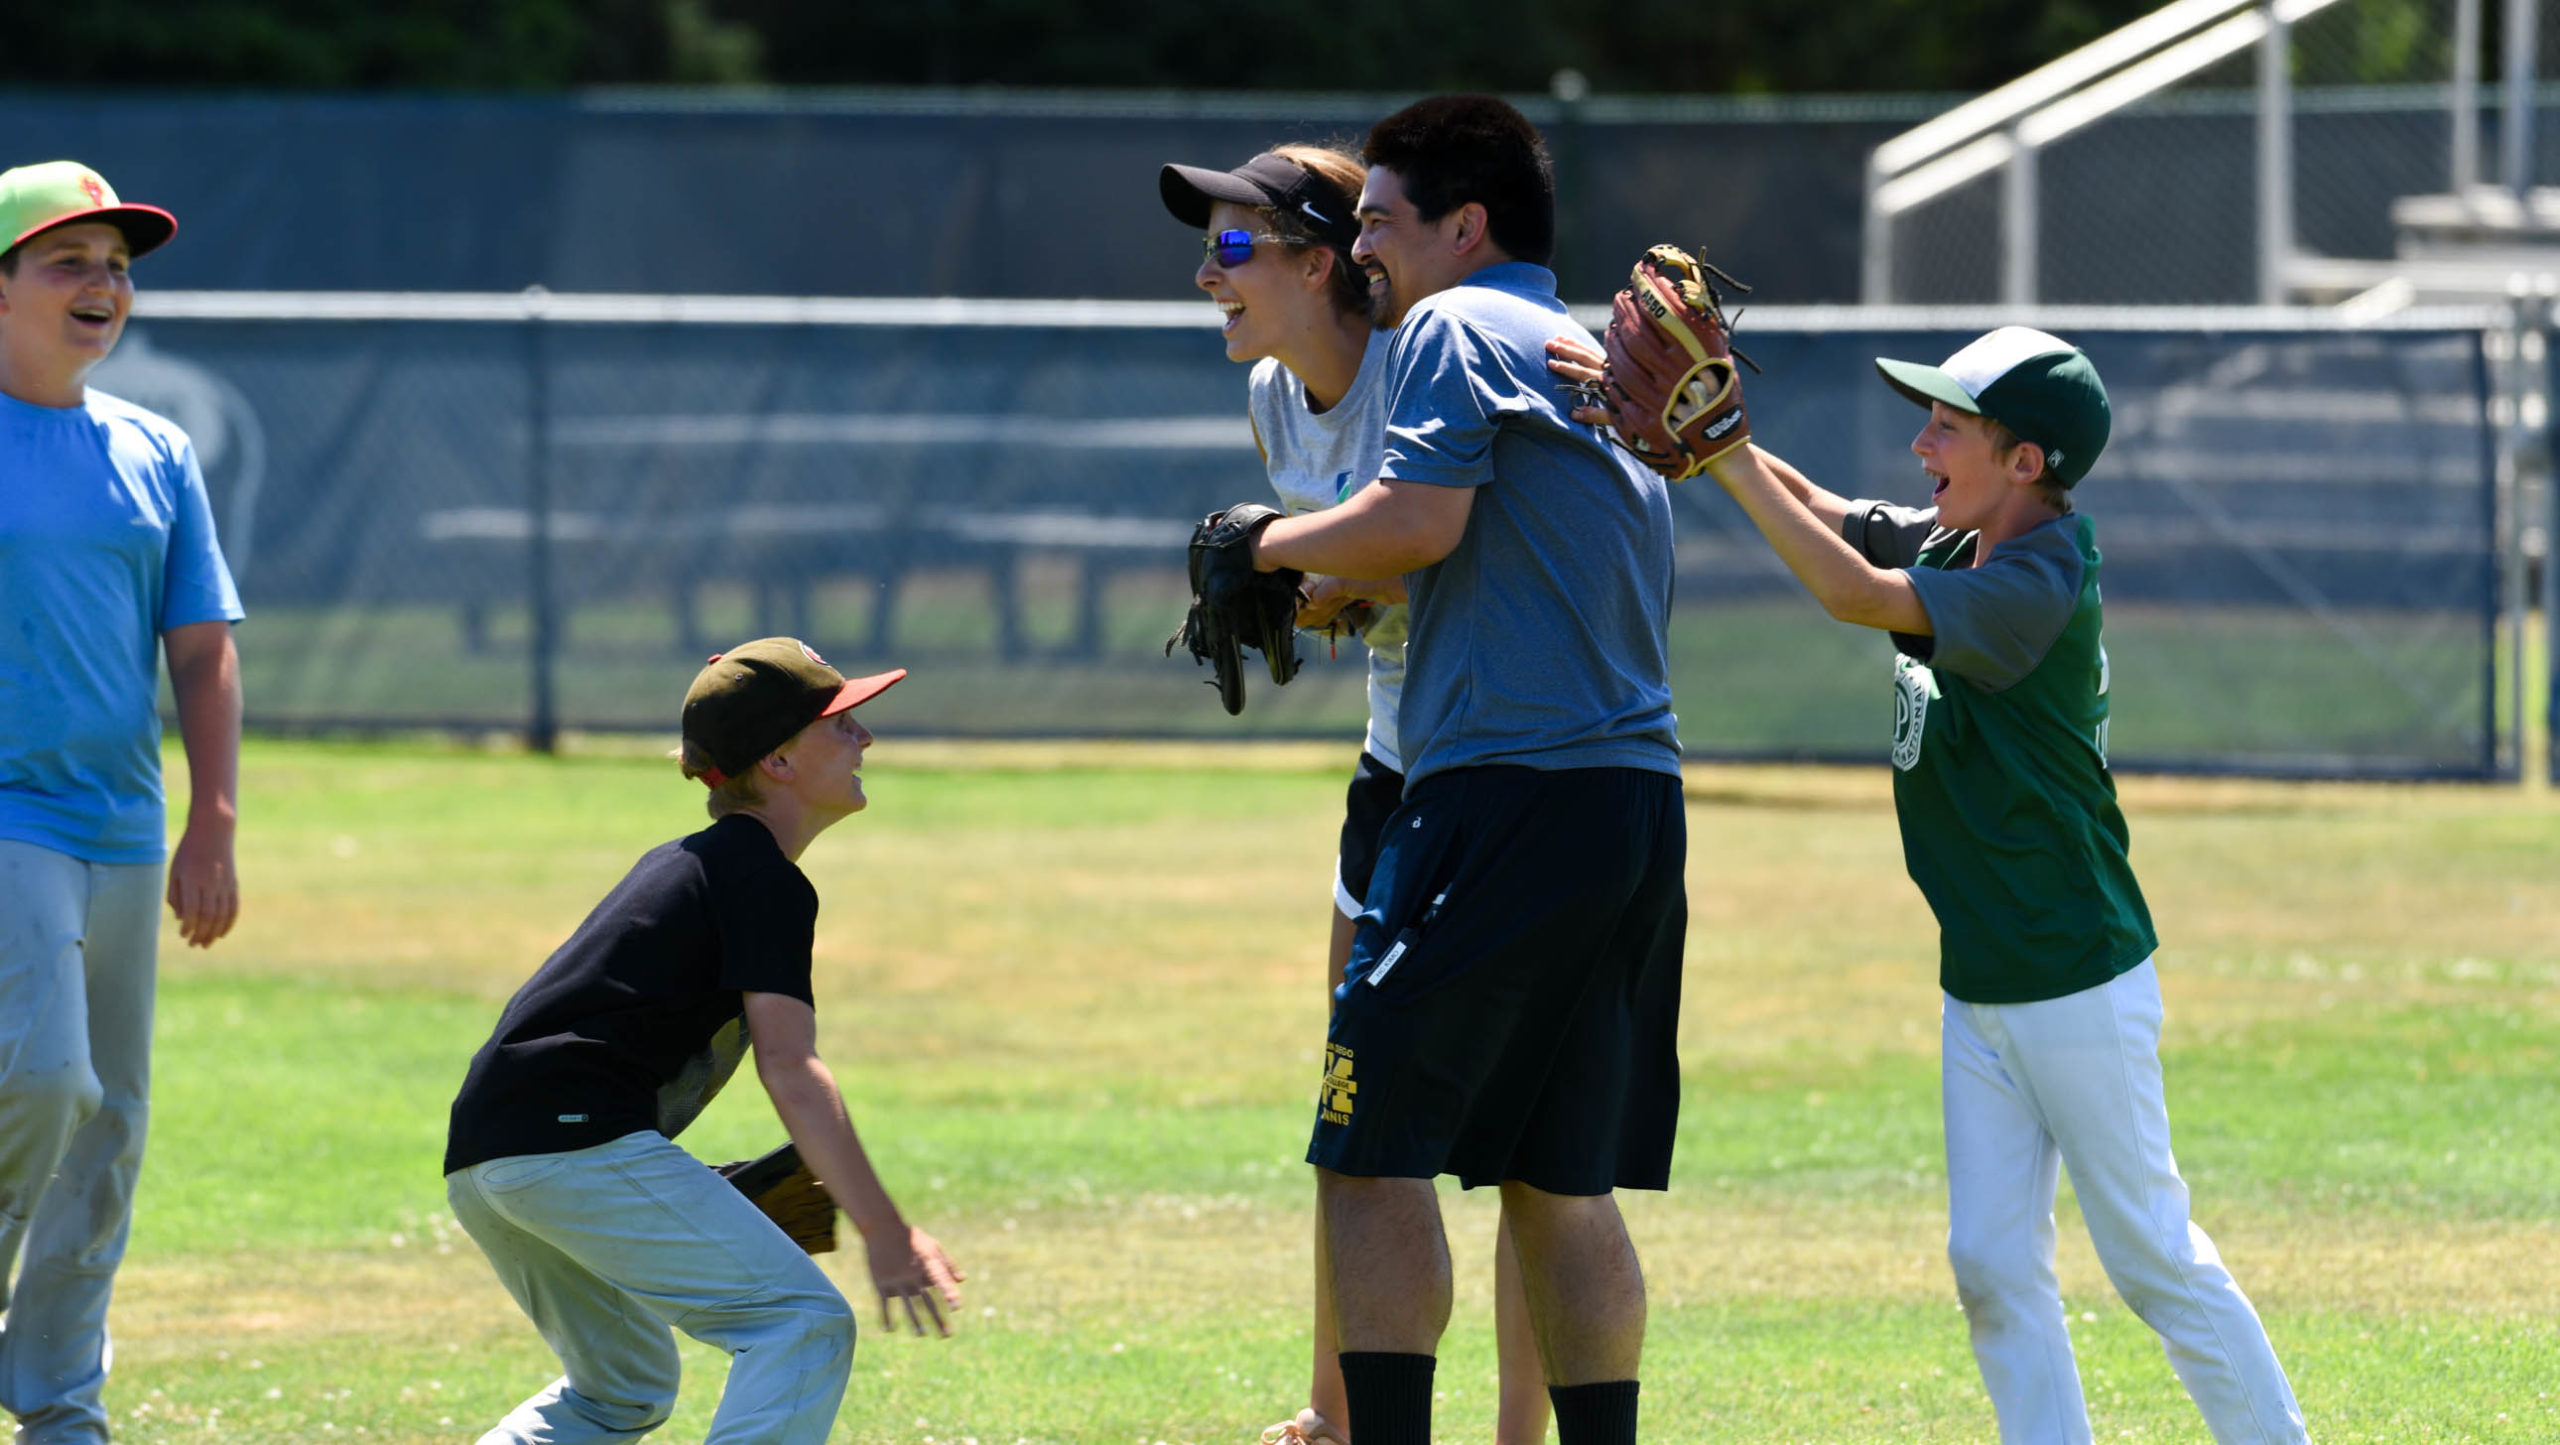 Baseball campers celebrating with staff member on the field.